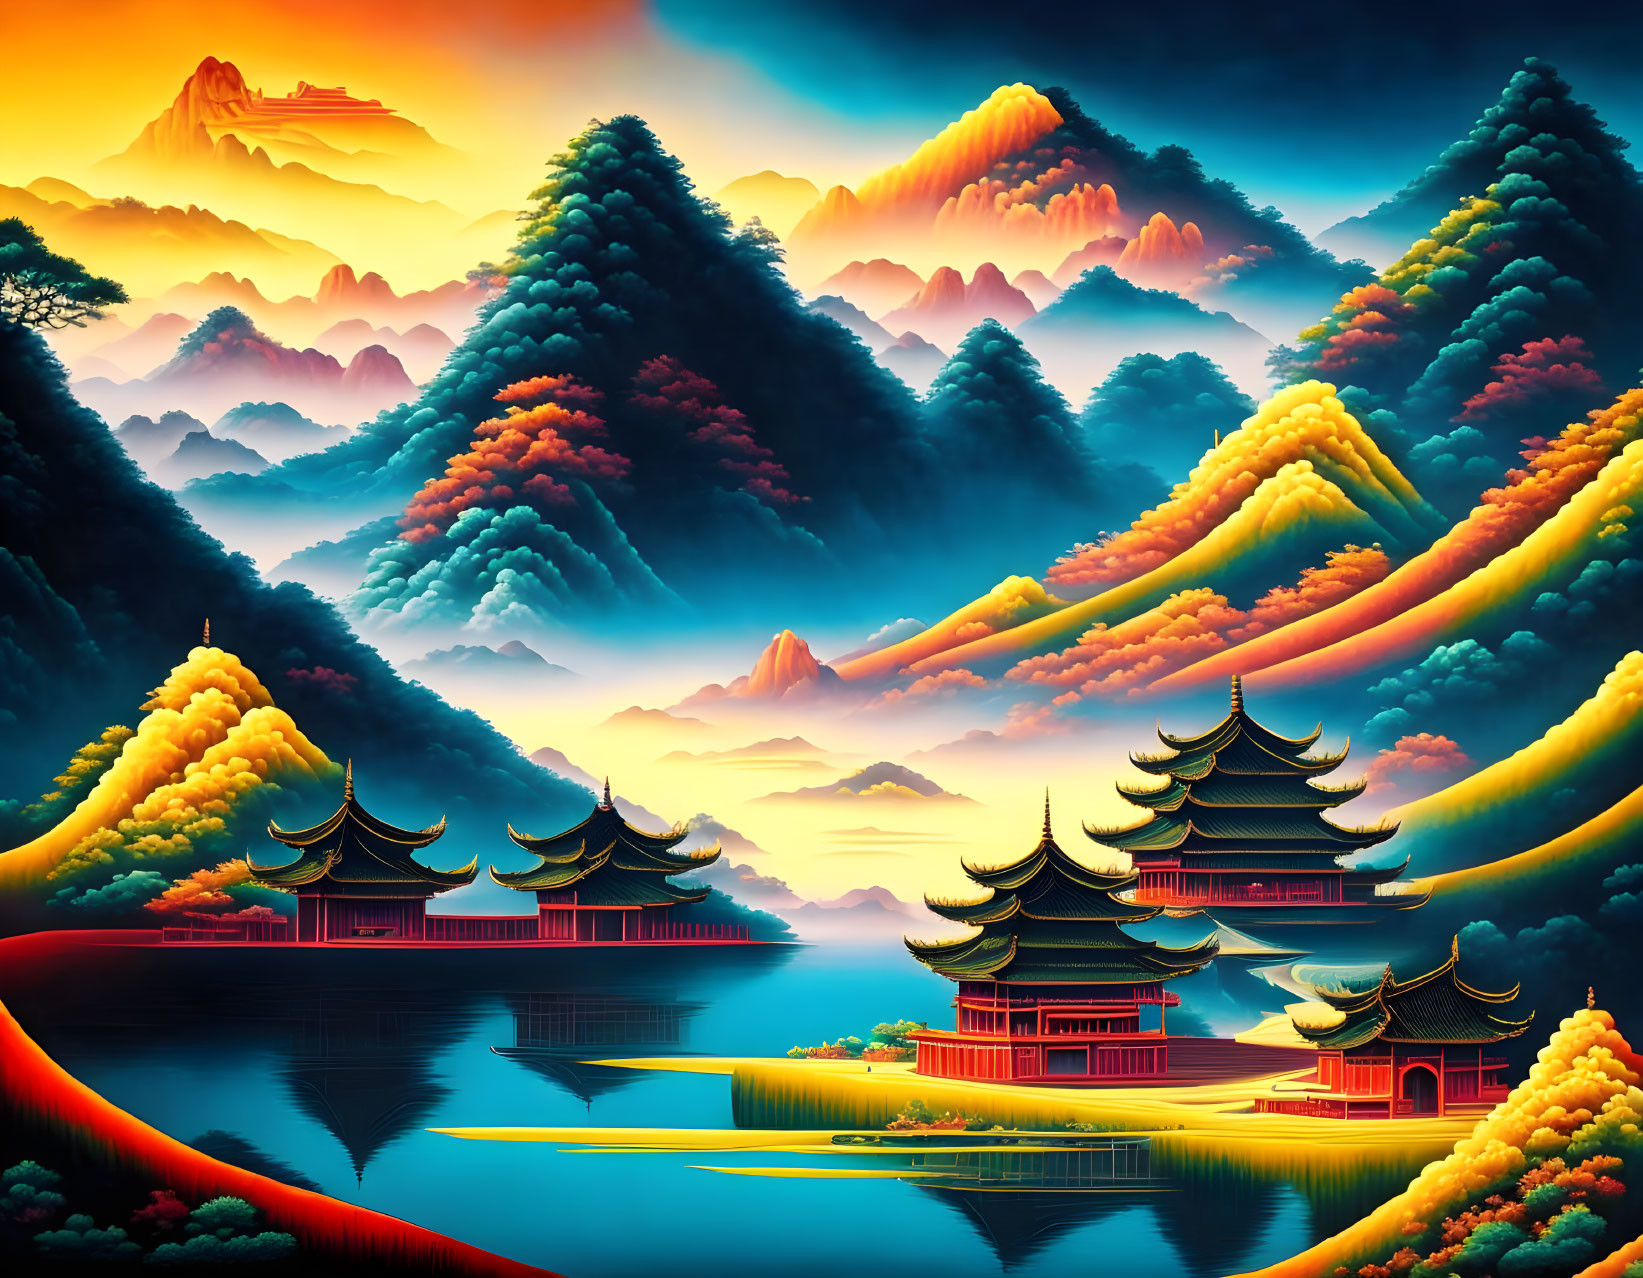 Surreal Asian pagodas in vibrant, colorful landscape with serene lake